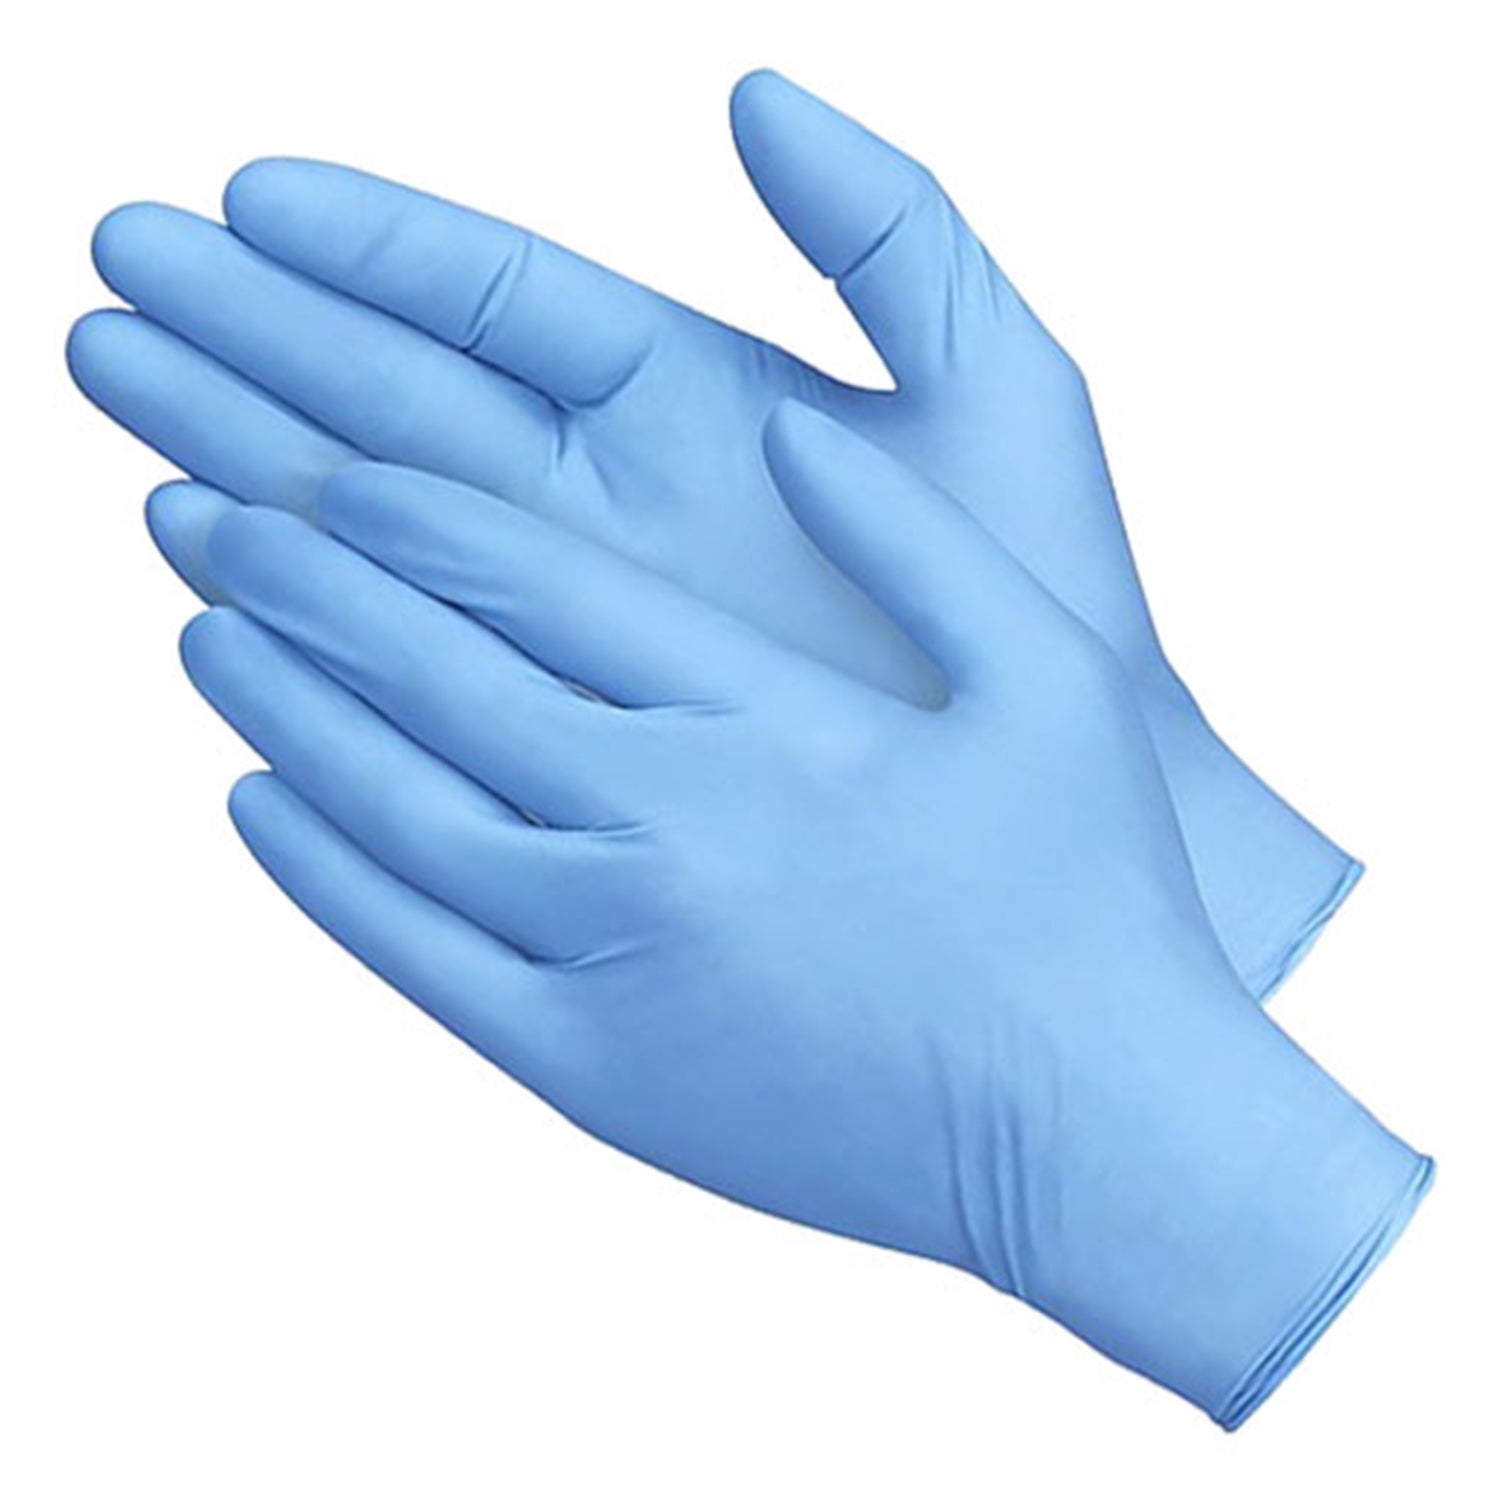 Premier AF Nitrile Examination Gloves | Sterile | Latex Free | Small | Pack of 50 Pairs (2)